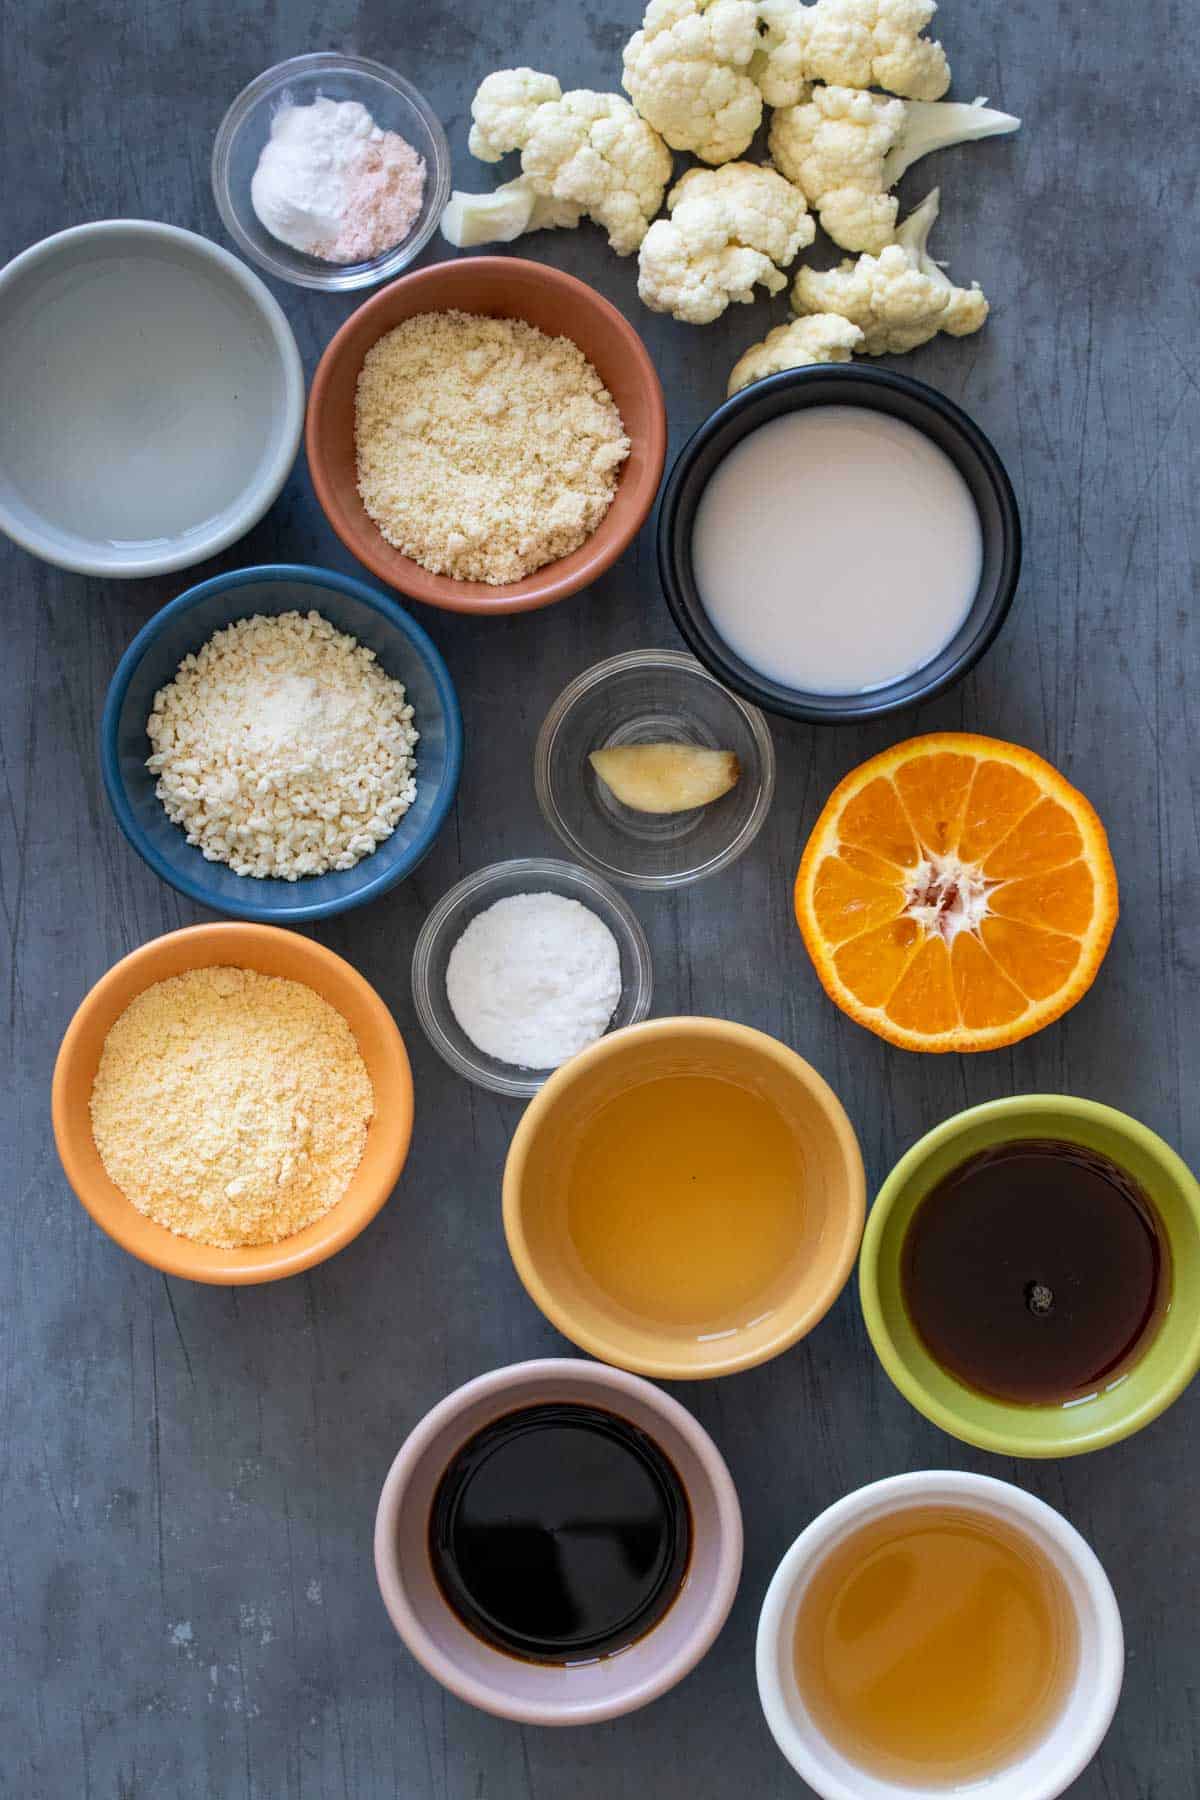 Top view of different colors bowls filled with liquids and flowers next to cauliflower, oranges and spices